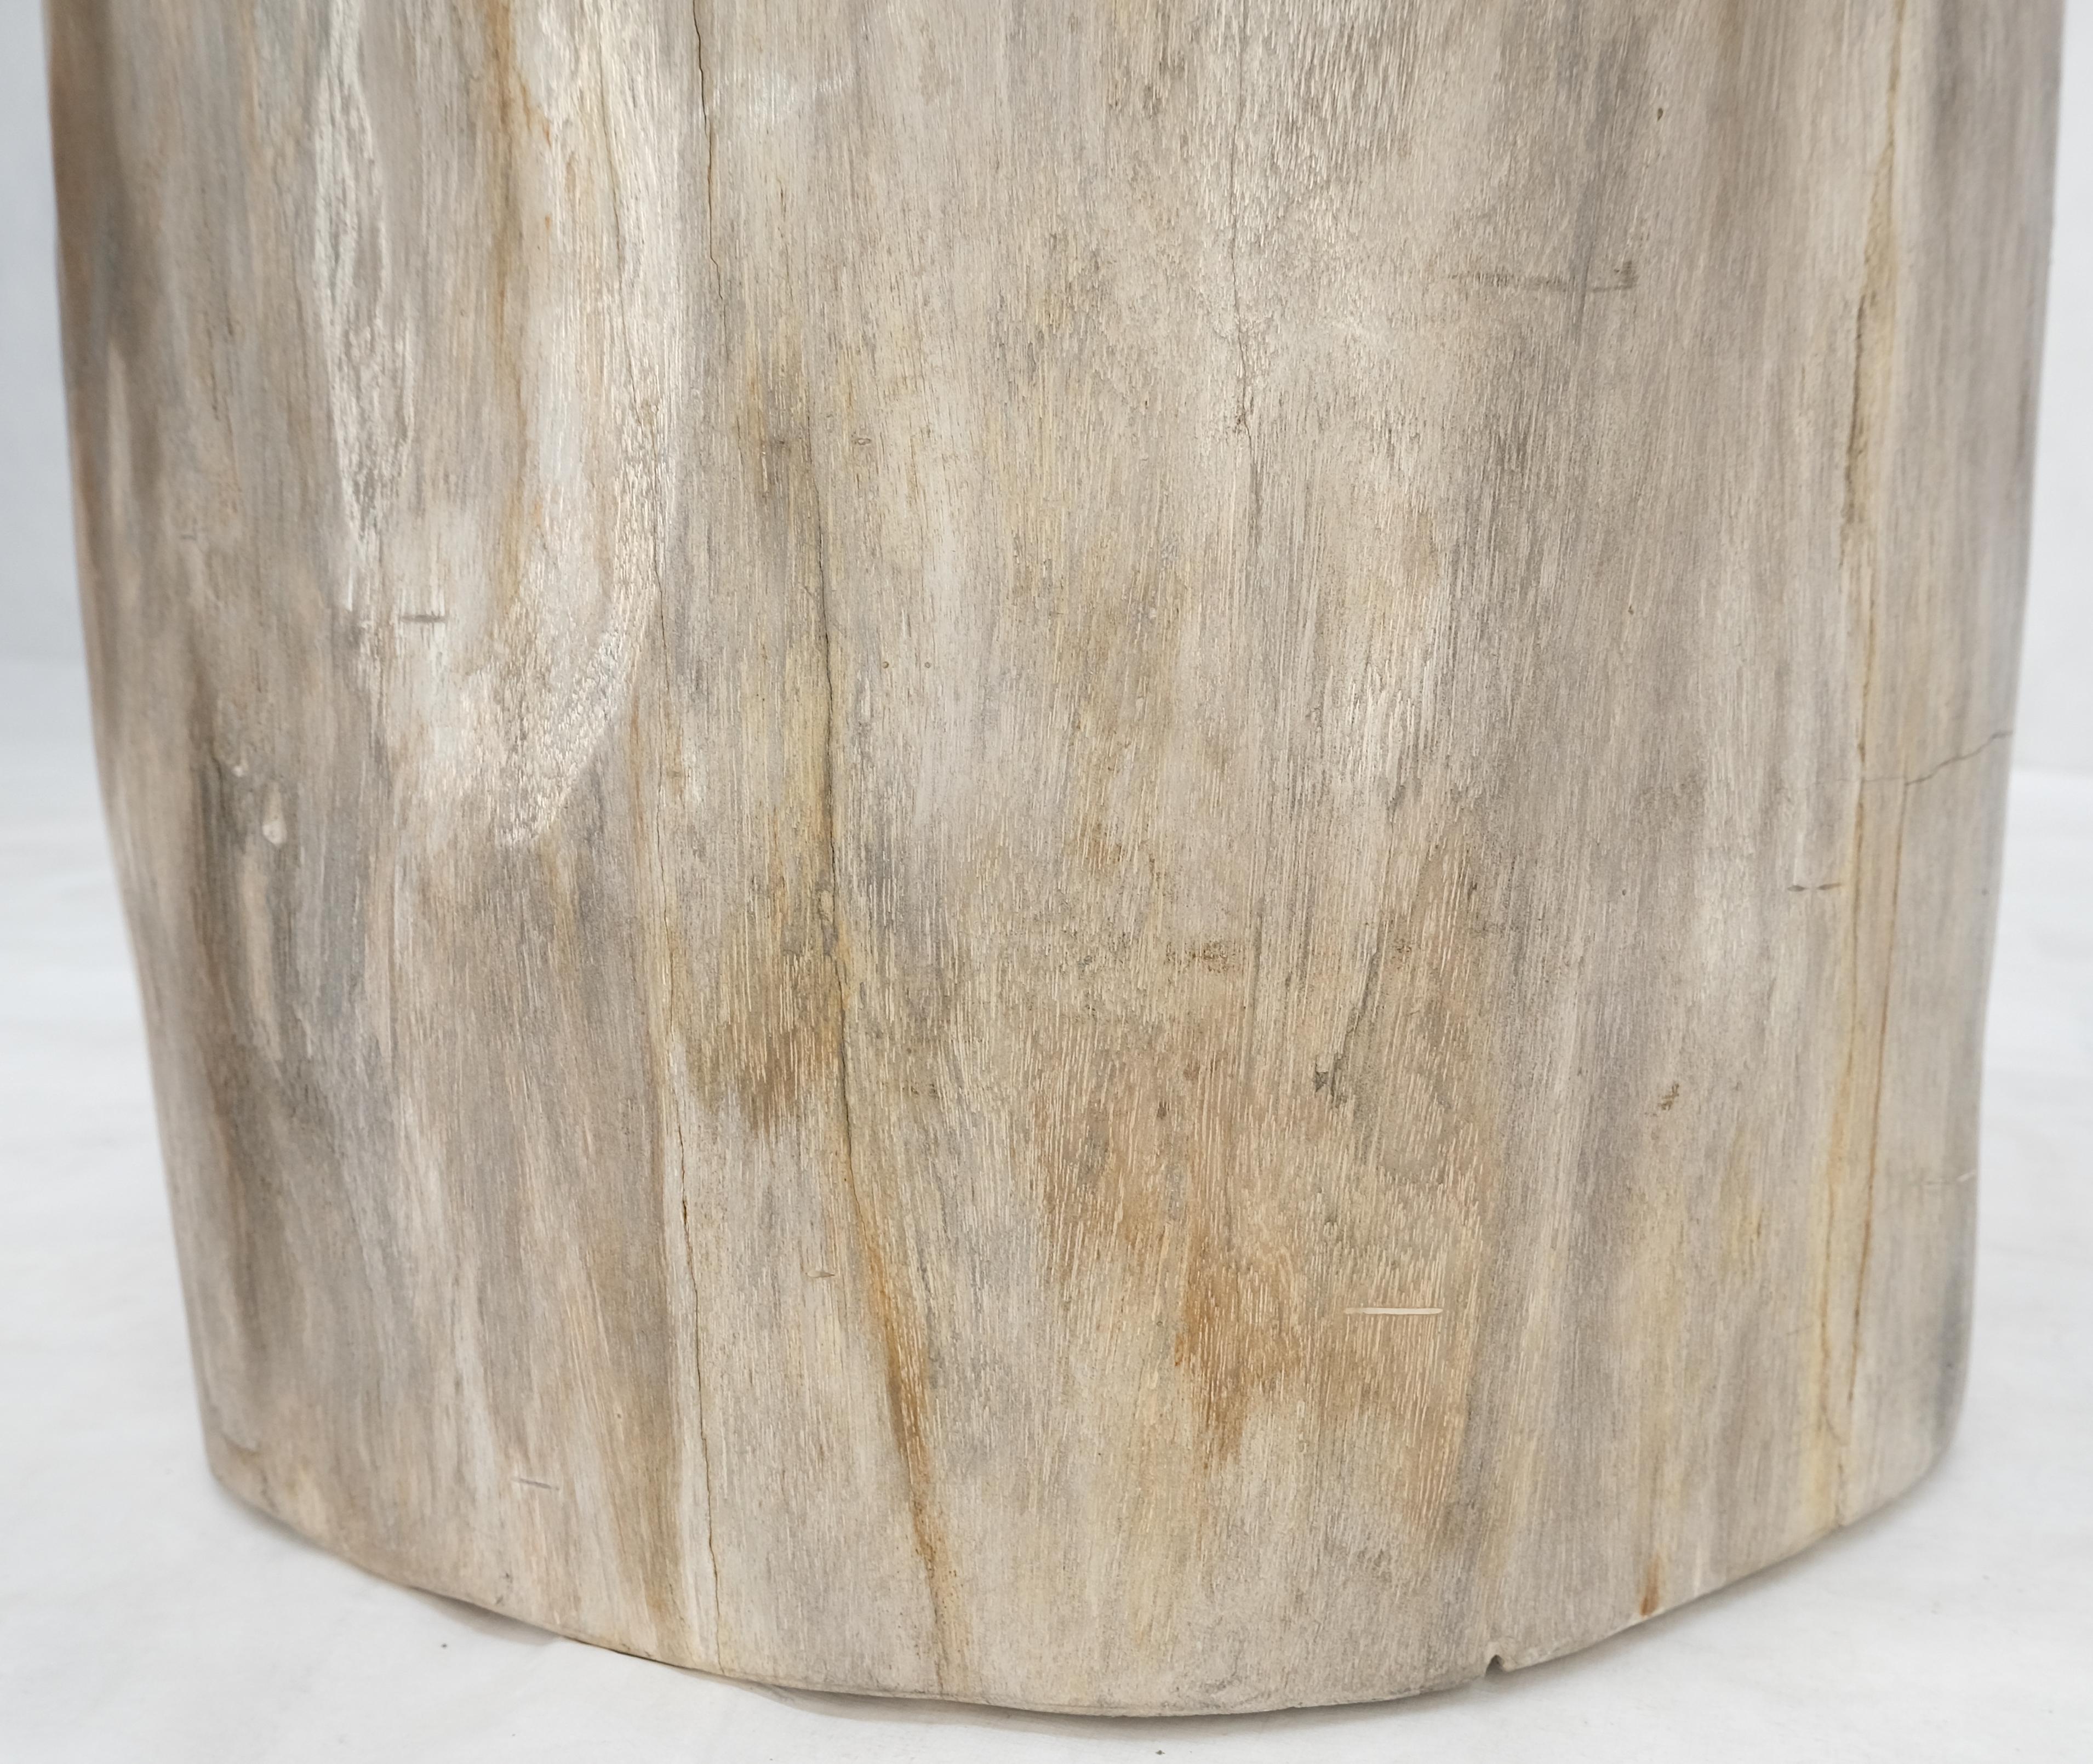 Beige Large Petrified Wood Organic Stomp Shape Stand End Side Table Pedestal In Excellent Condition For Sale In Rockaway, NJ